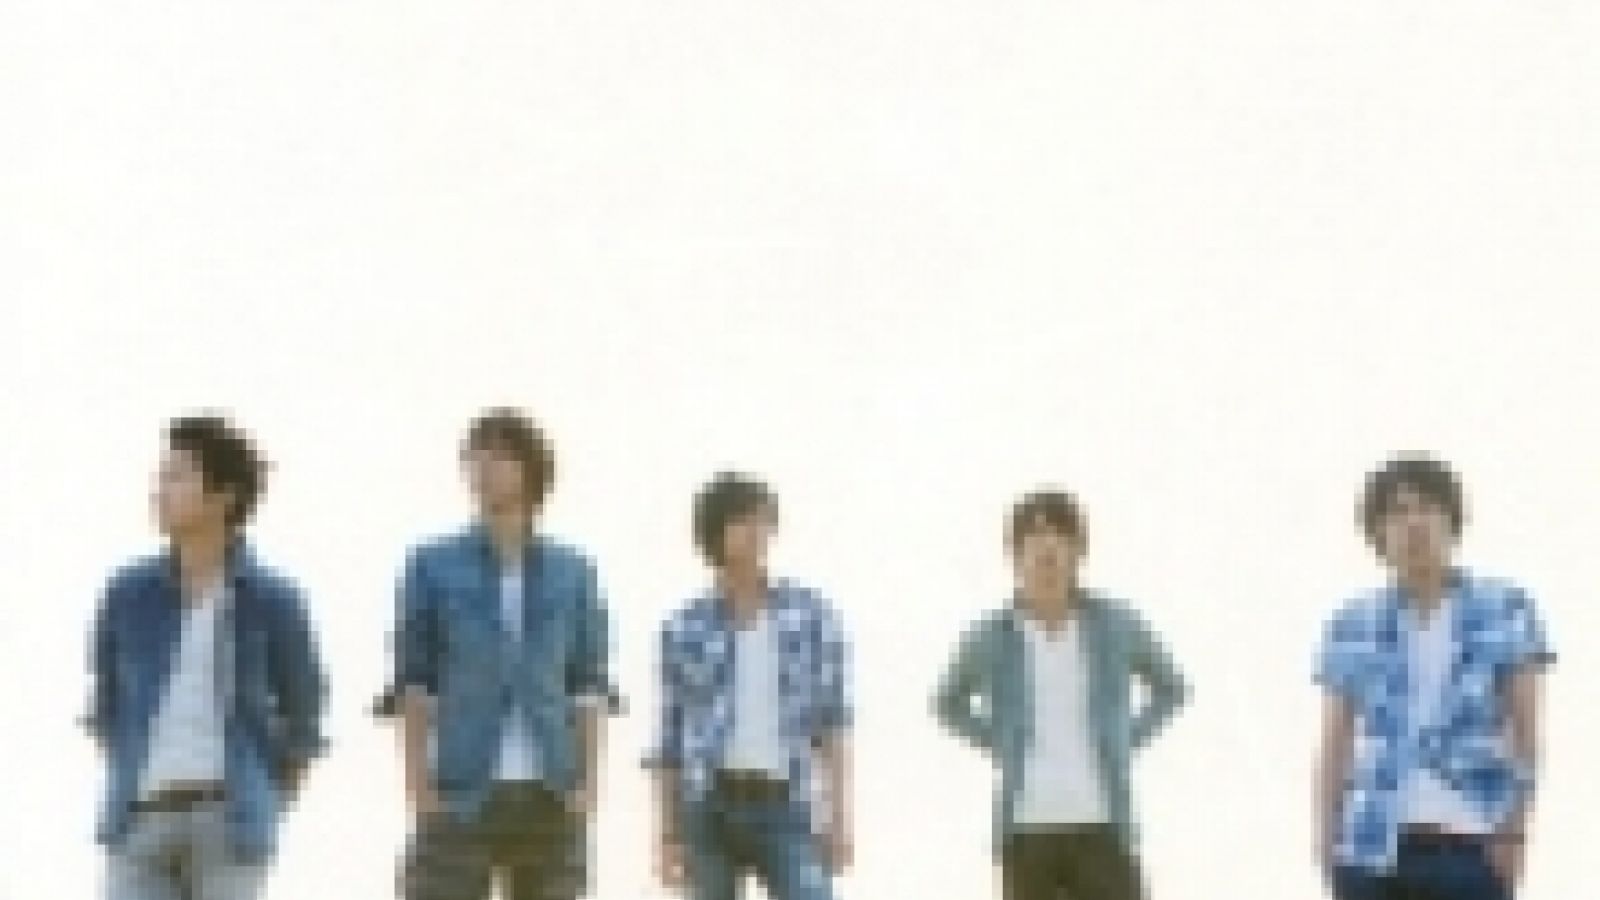 Arashi - Everything © KAT-TUN. All rights reserved.